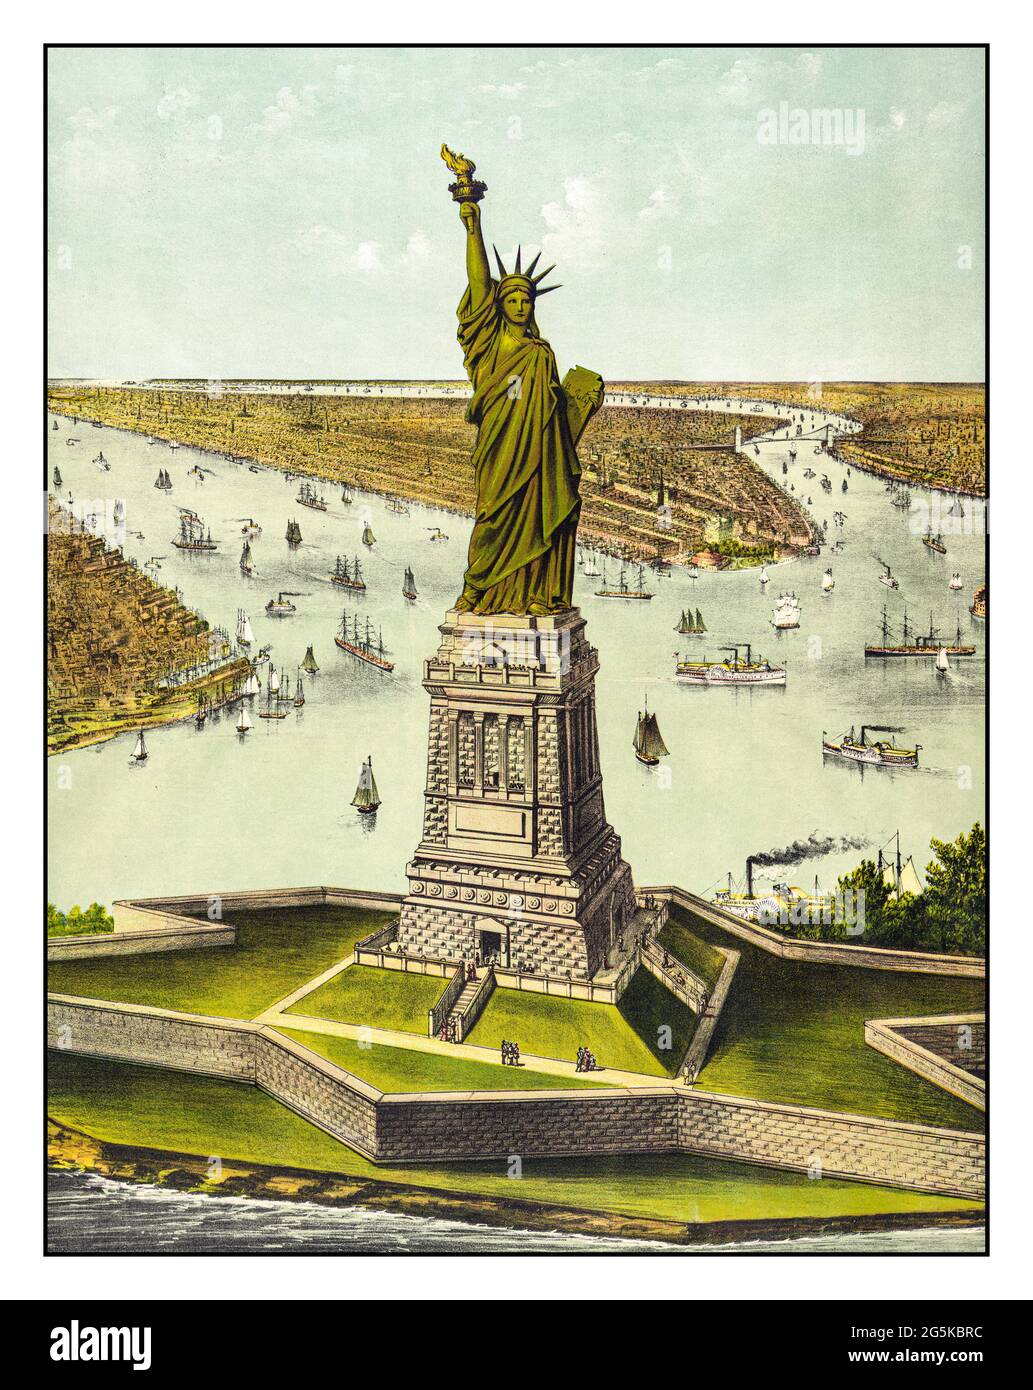 THE STATUE OF LIBERTY ILLUSTRATION The great Bartholdi statue, liberty enlightening the world: the gift of France to the American people New York America USA : Published by Currier & Ives, c1885 Chromolithographs--Color--1880-1890. Currier & Ives chromolithograph. Stock Photo